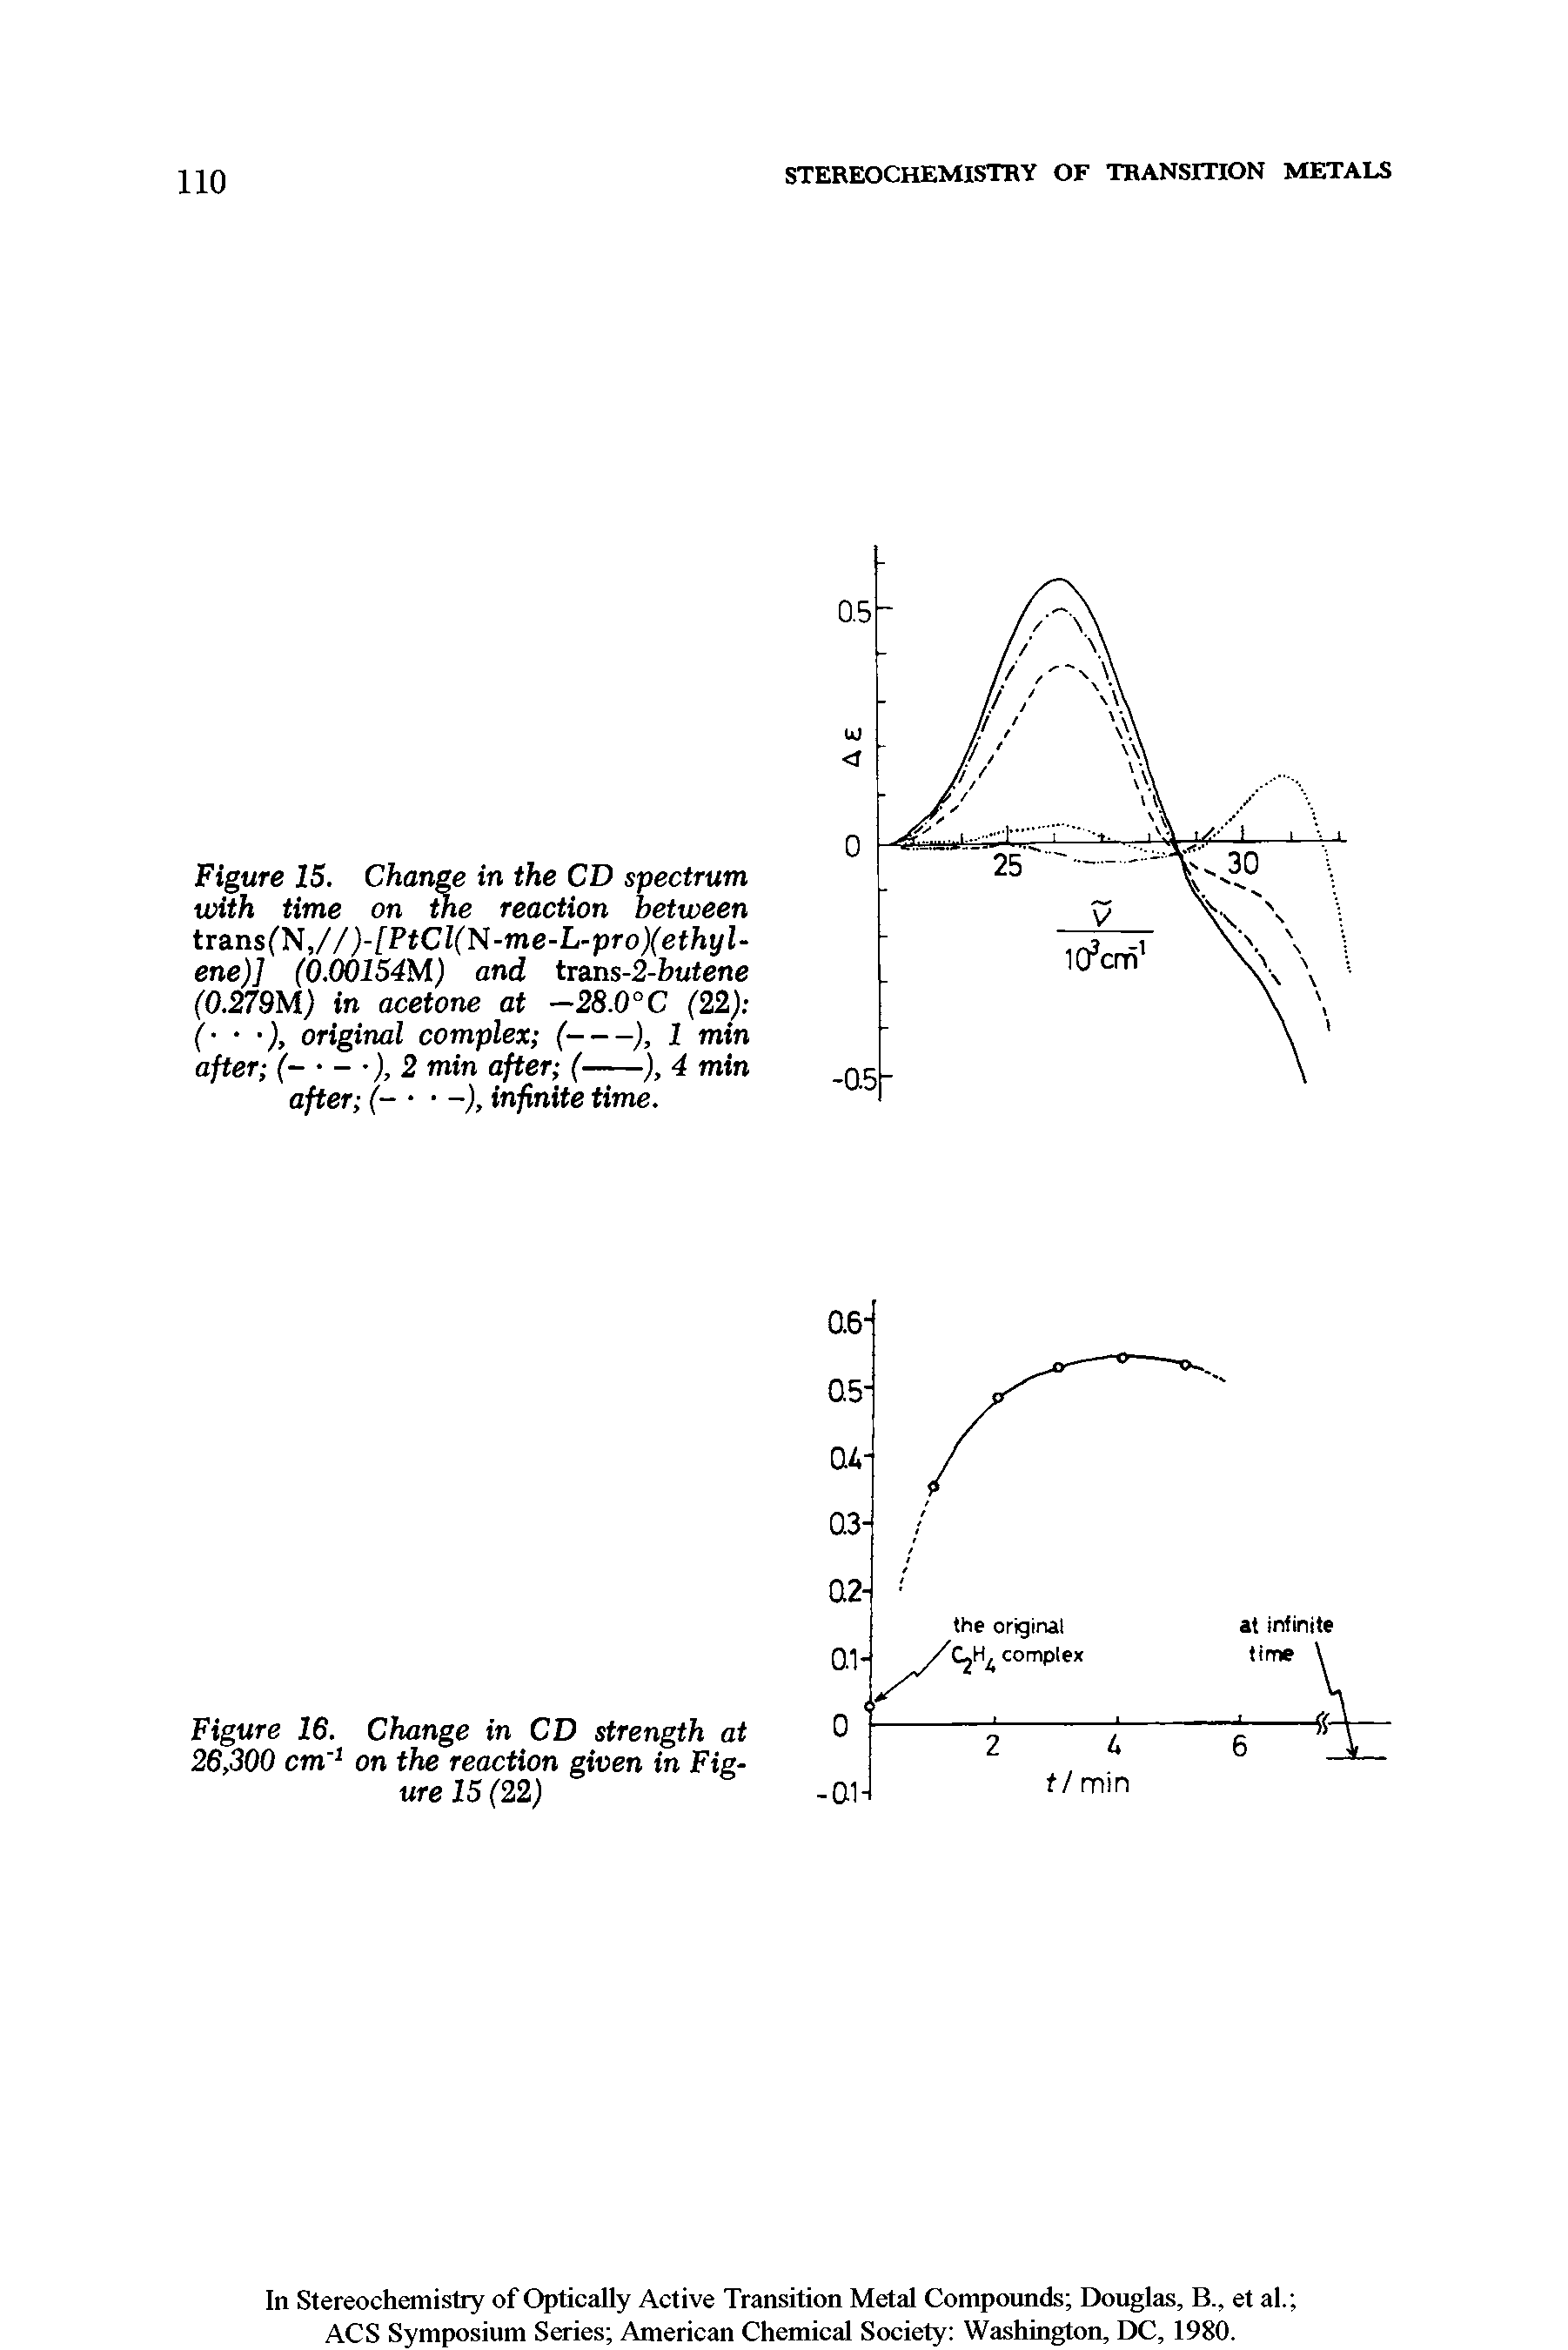 Figure 15. Change in the CD spectrum with time on the reaction between tra.nsCN,//)-[PtCl(N-me-L-proXethyl-ene)] (0.00154M) and trans-2-butene (0.279M) in acetone at —28.0°C (22) ...